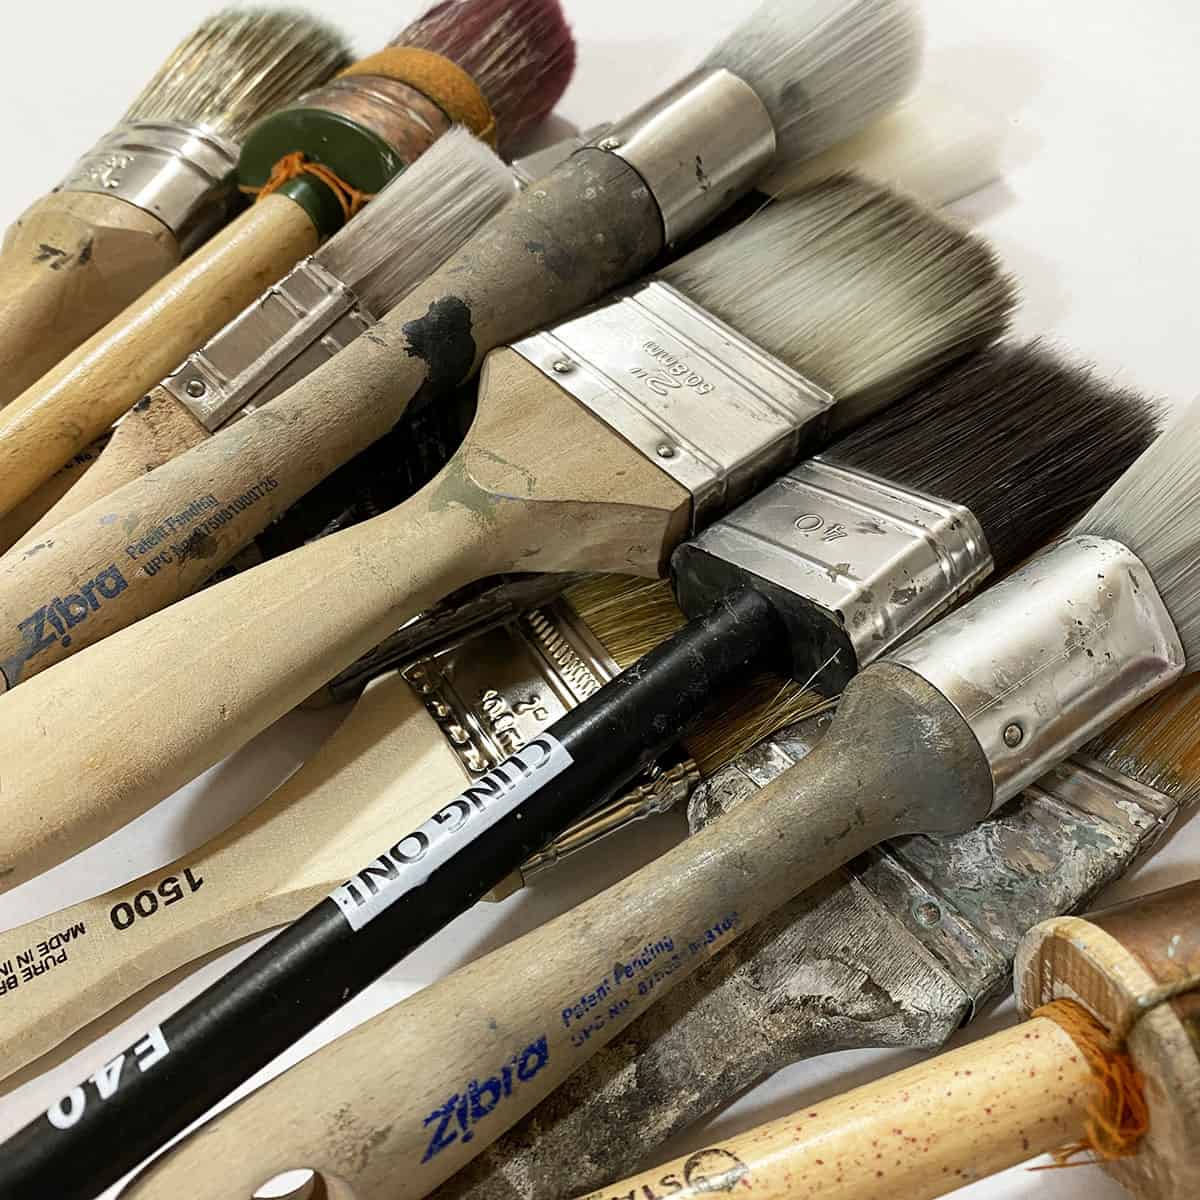 The Best Paint Brushes for Painting Furniture